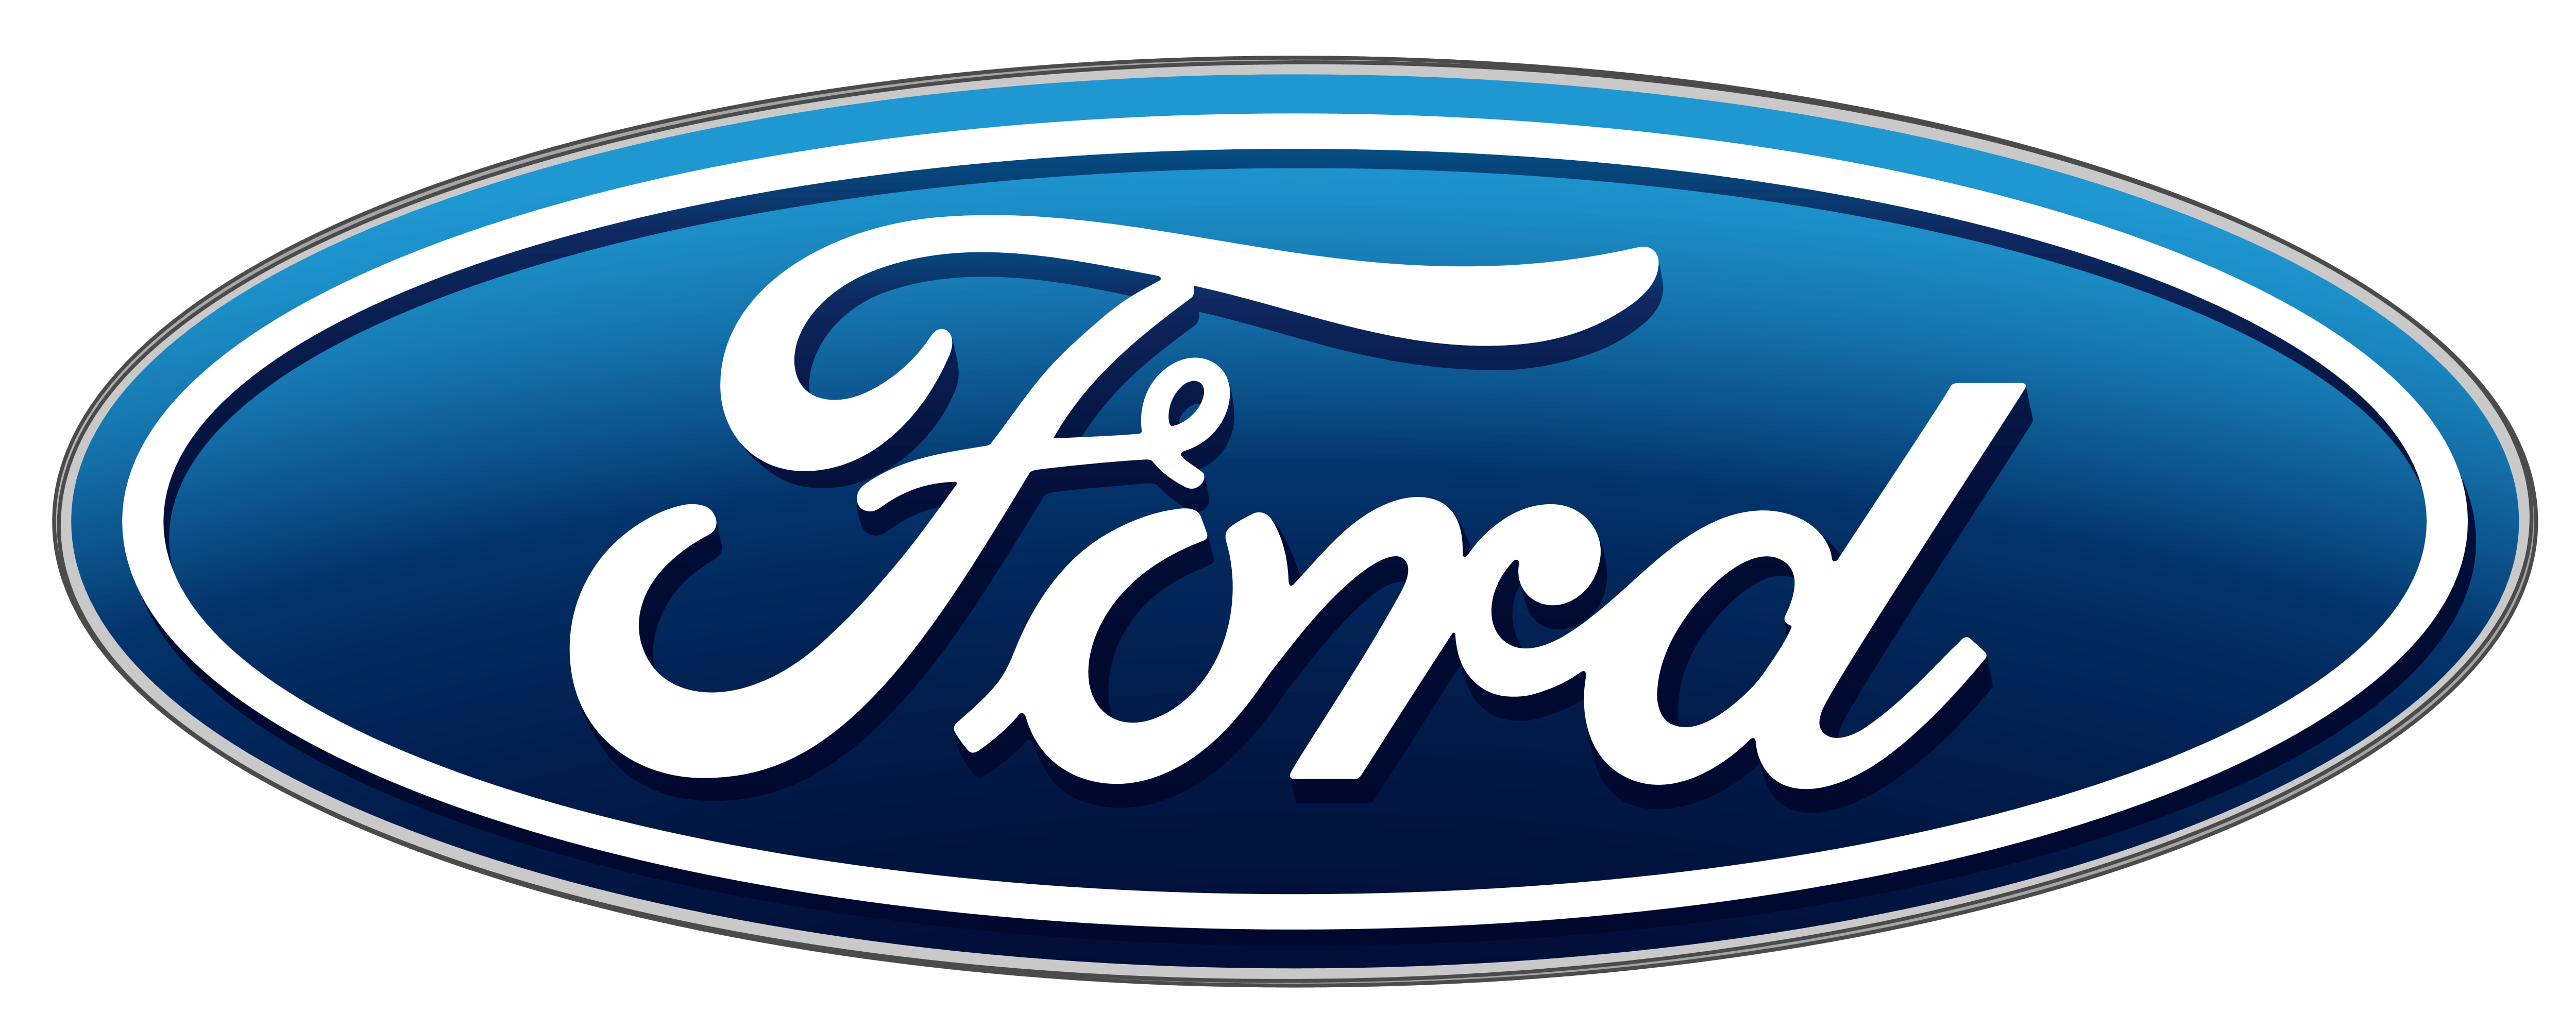 Ford logo (Ford Motor Company), transparent background